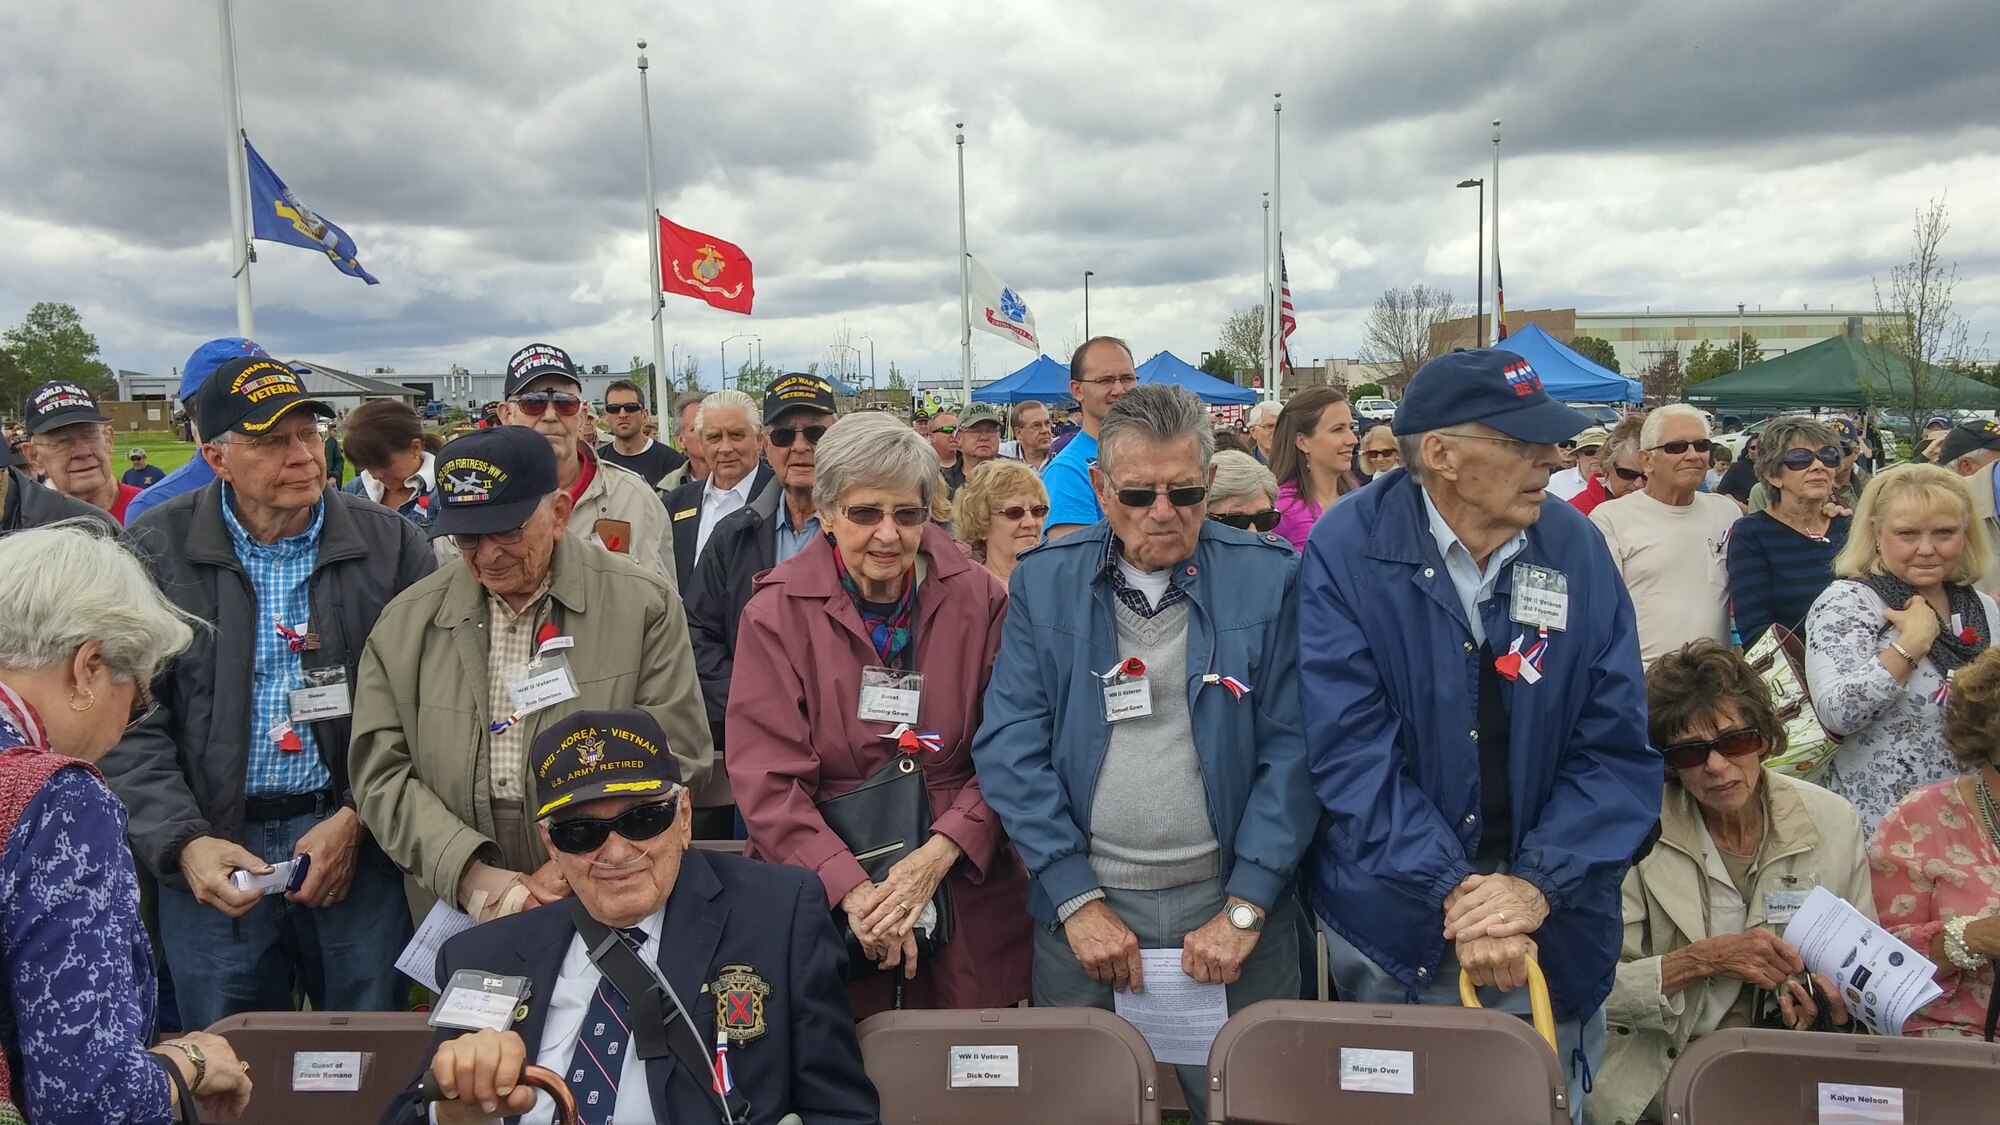 World War II veterans stand to be recognized during the Memorial Day ceremony May 23, 2015, at the Colorado Freedom Memorial in Aurora, Colorado. This year’s ceremony had multiple guest speakers, flyovers, military displays and also marked the 70th anniversary of the end of World War II. (courtesy photo)